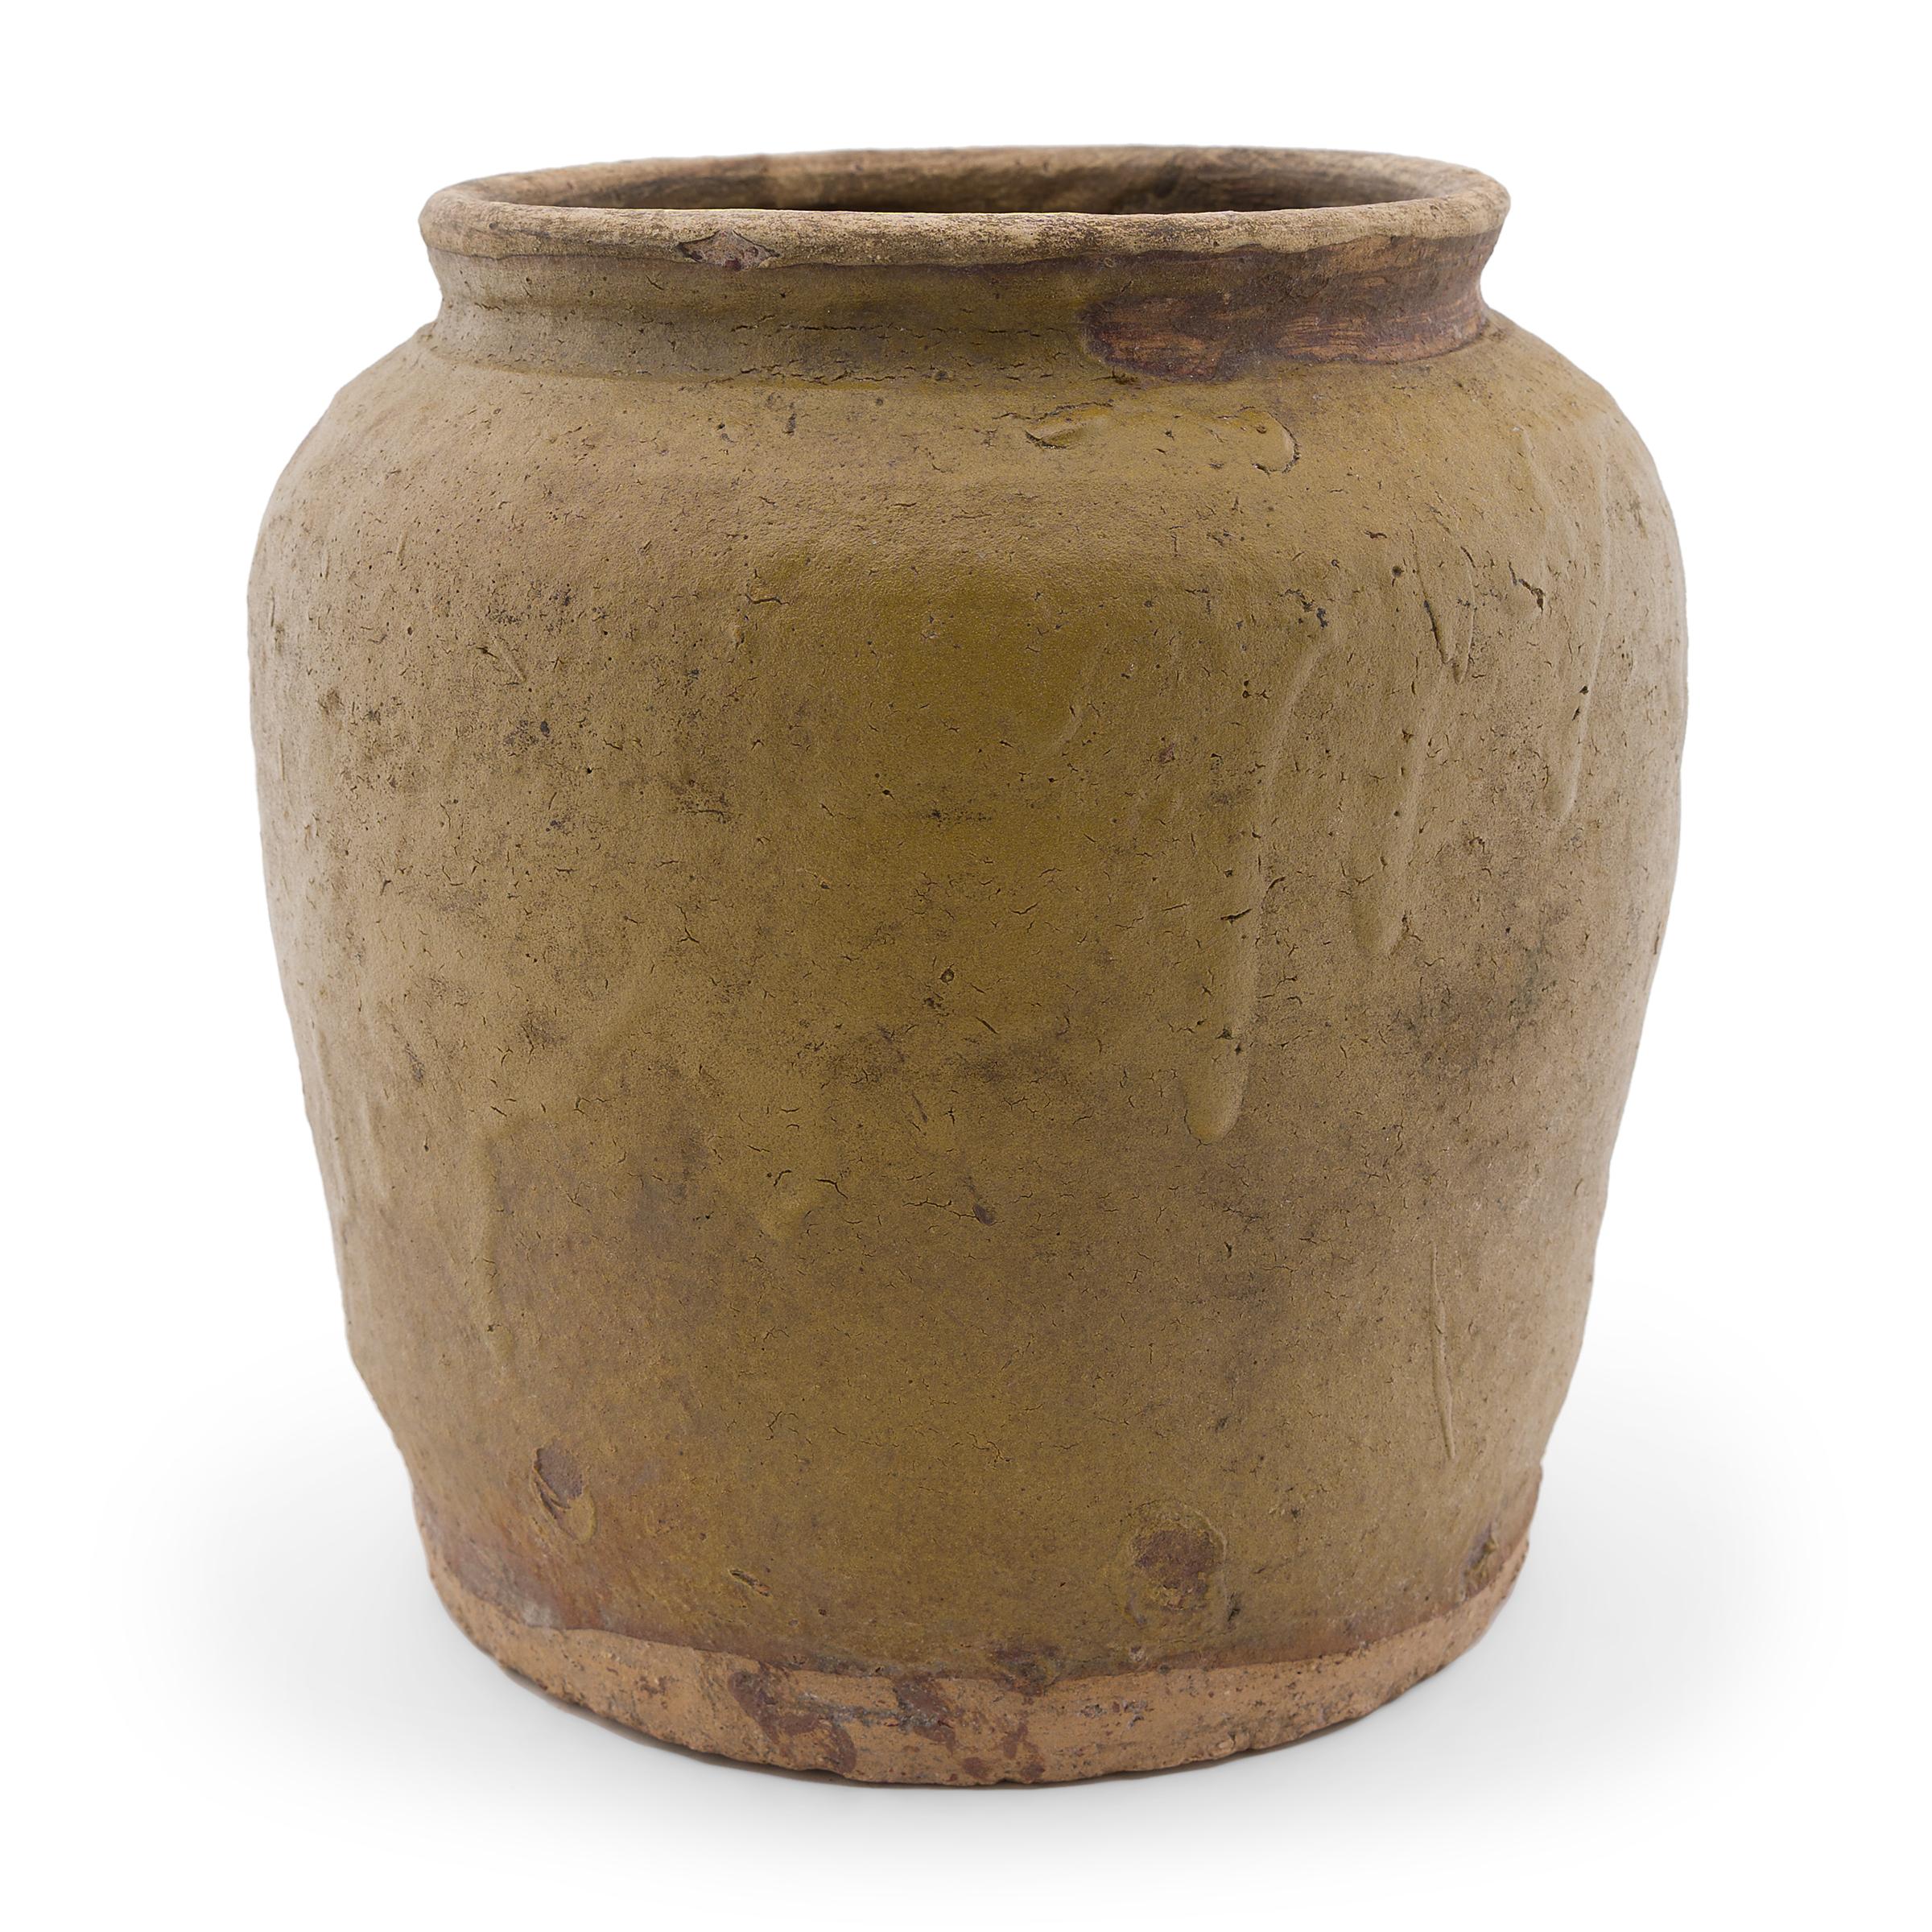 Originally used for fermenting foods and condiments in a provincial Chinese kitchen, this early 20th century terracotta jar is cloaked in a thick mustard yellow glaze. The jar has a slightly tapered form with a wide base, high shoulders, and a